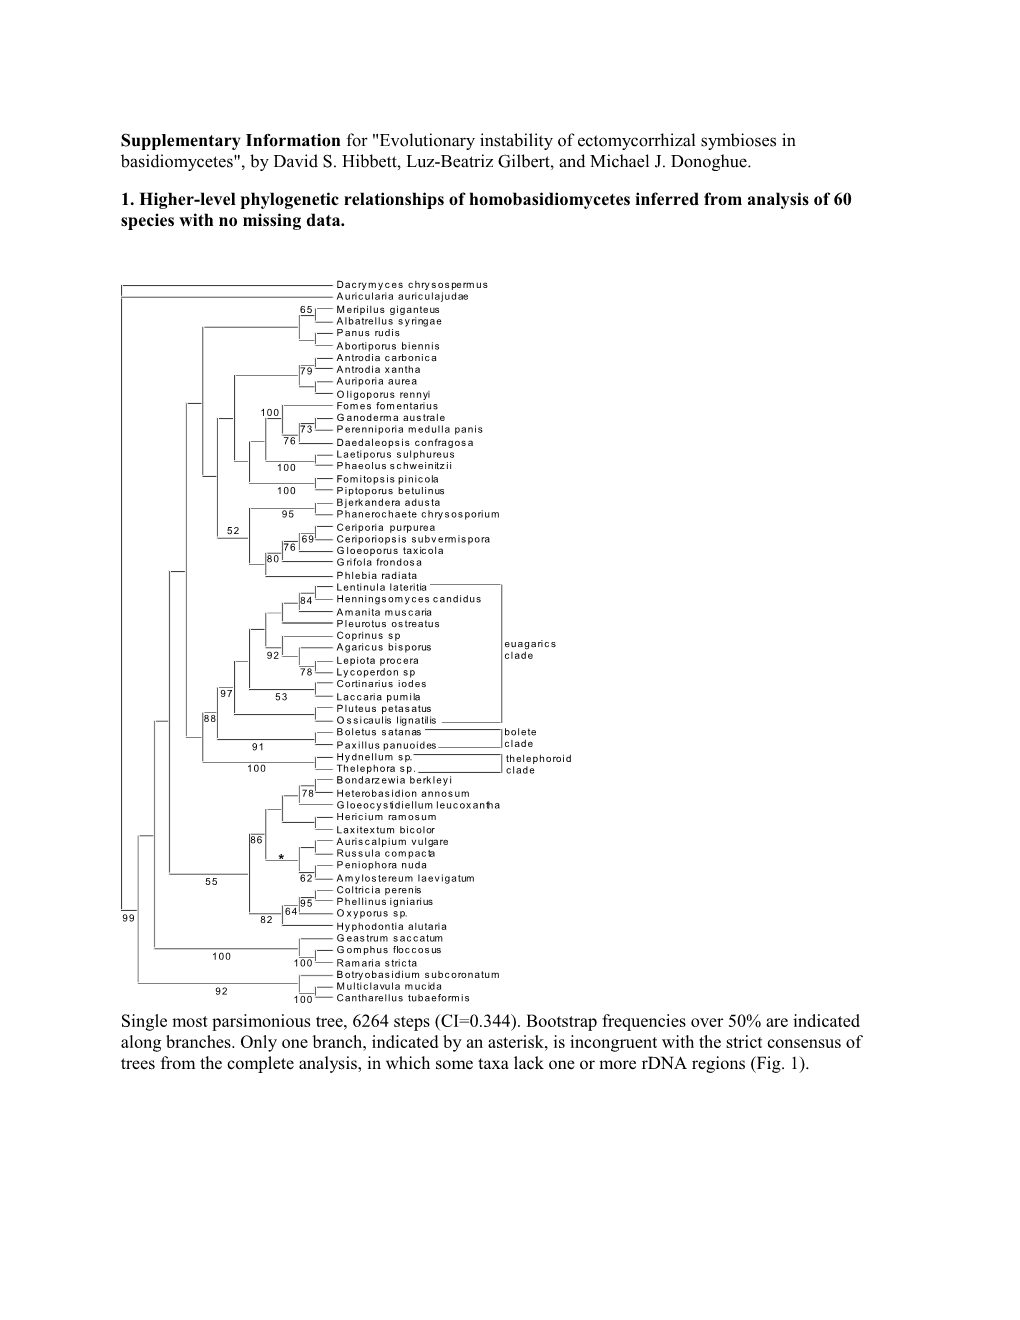 1. Higher-Level Phylogenetic Relationships of Homobasidiomycetes Inferred from Analysis